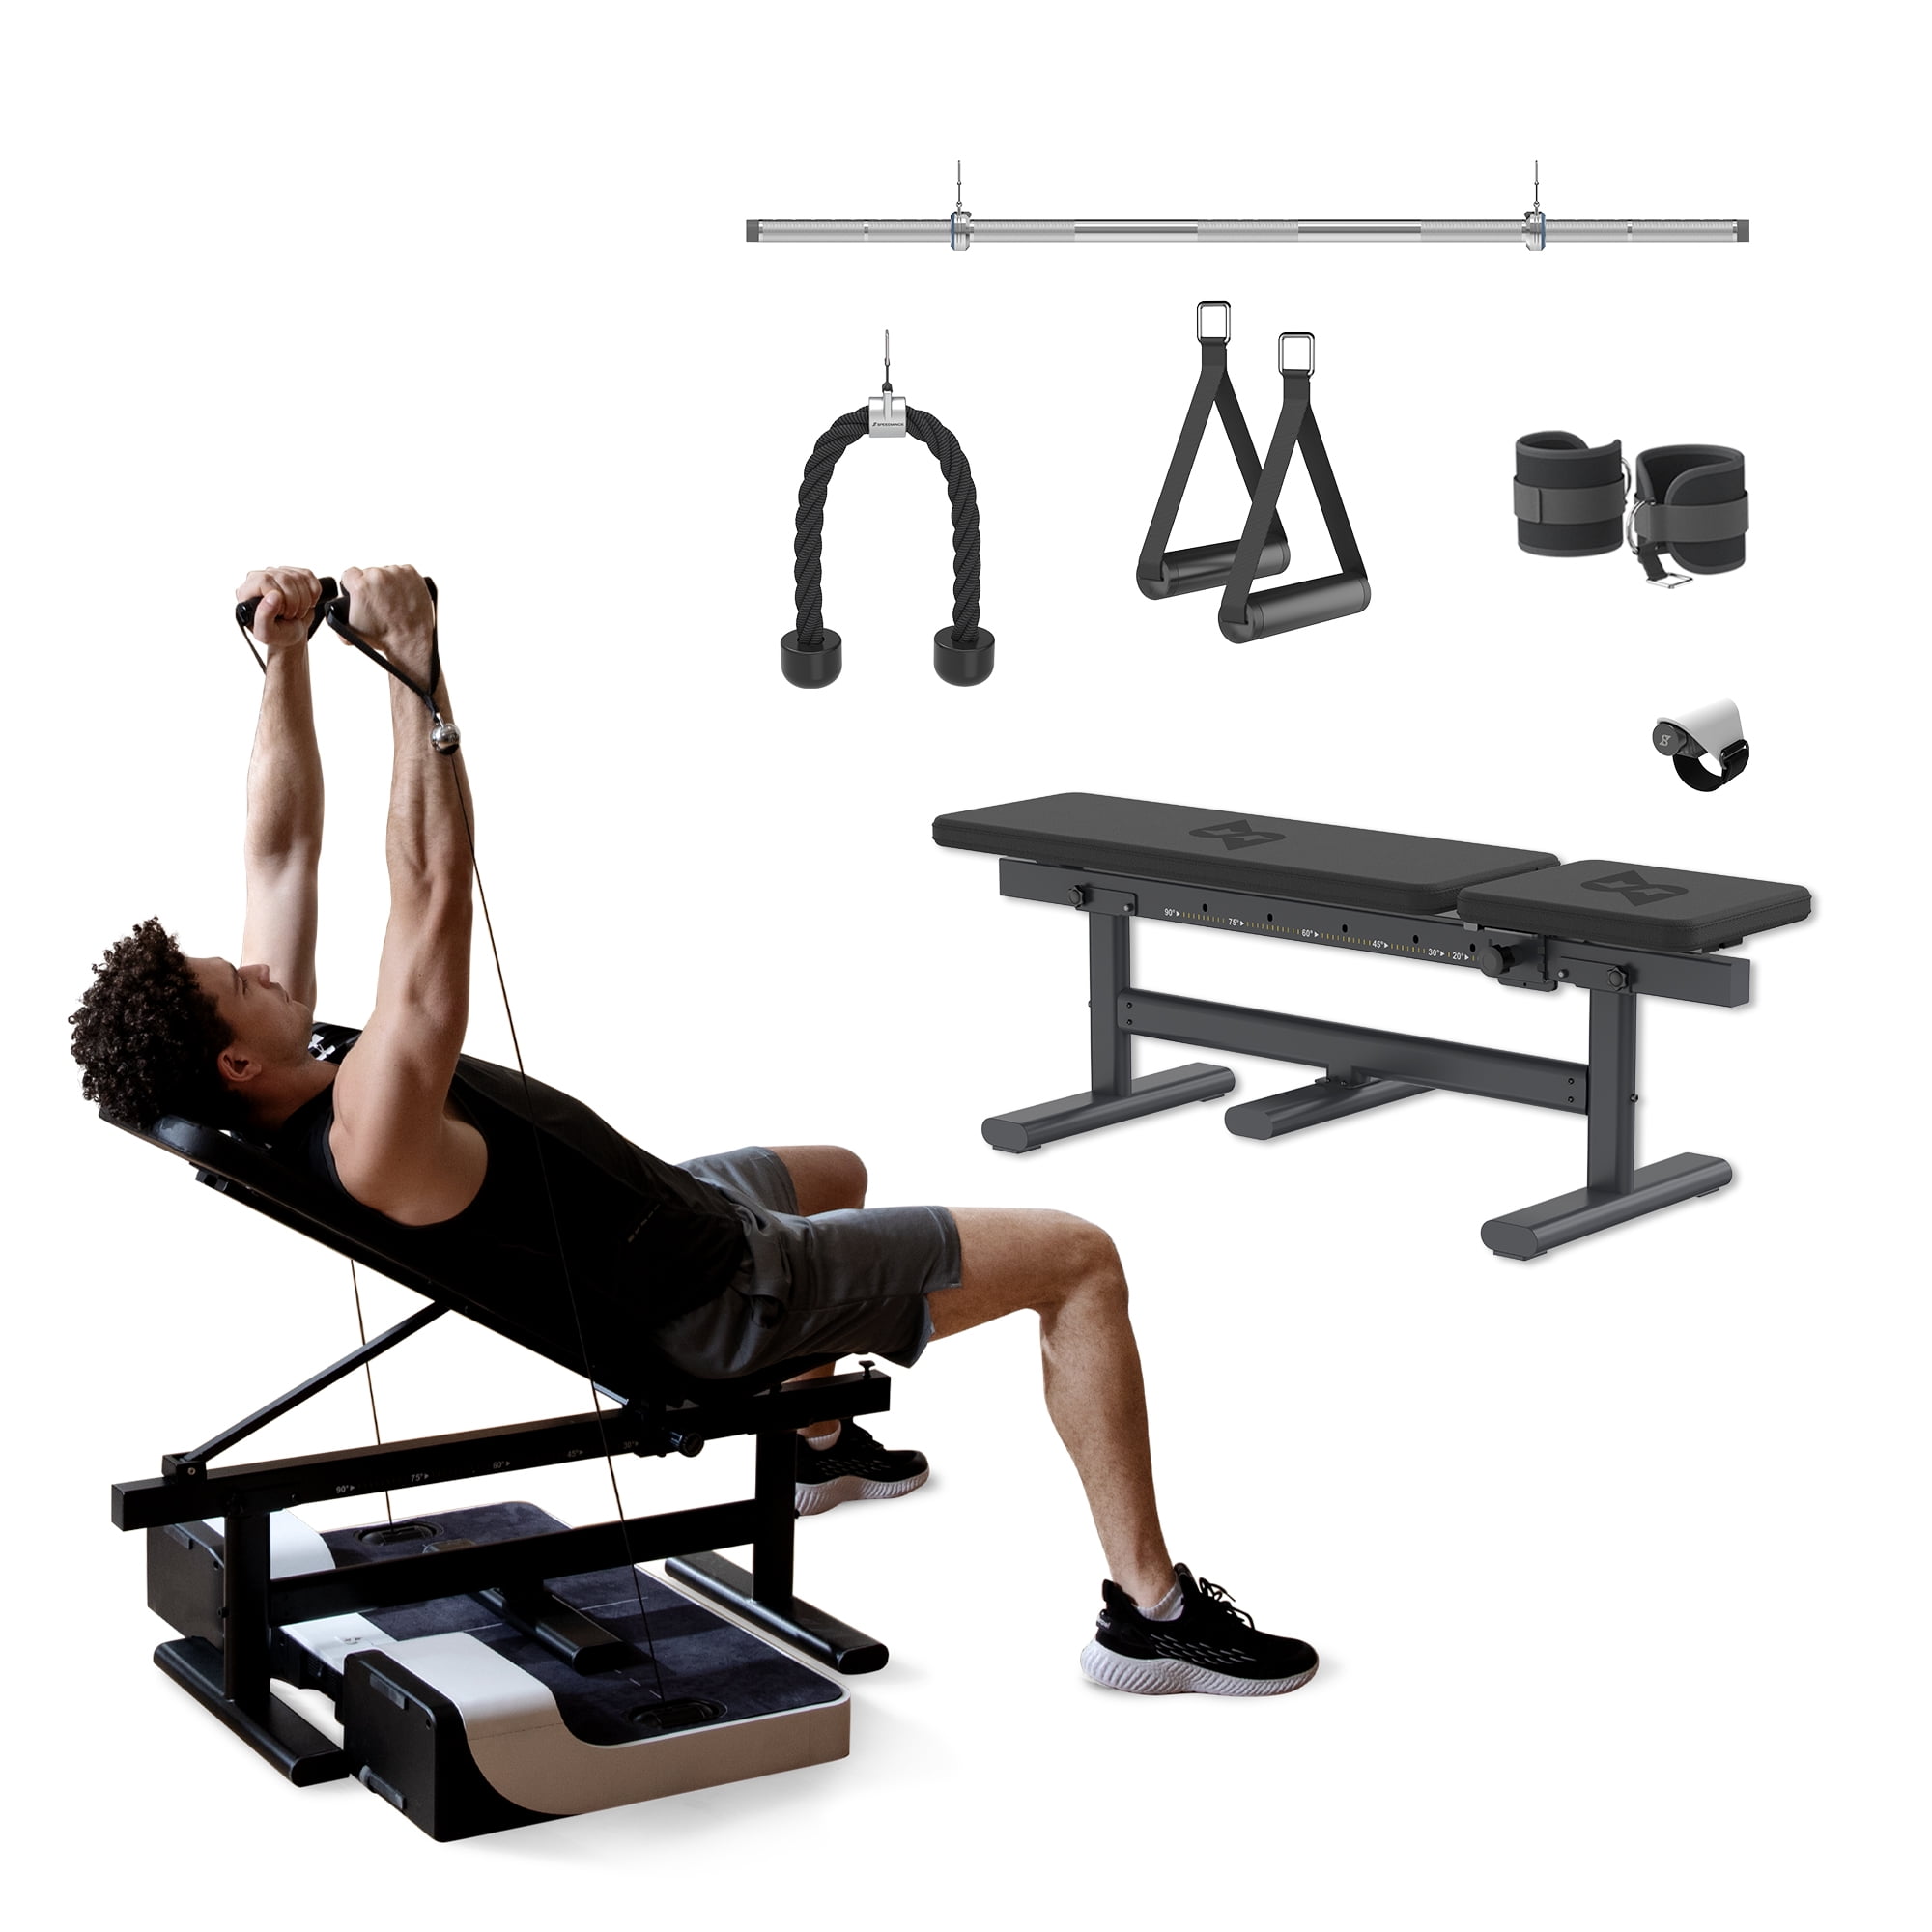 Costway Portable Home Gym Full Body Workout Equipment w/ 8 Exercise Accessories, Black